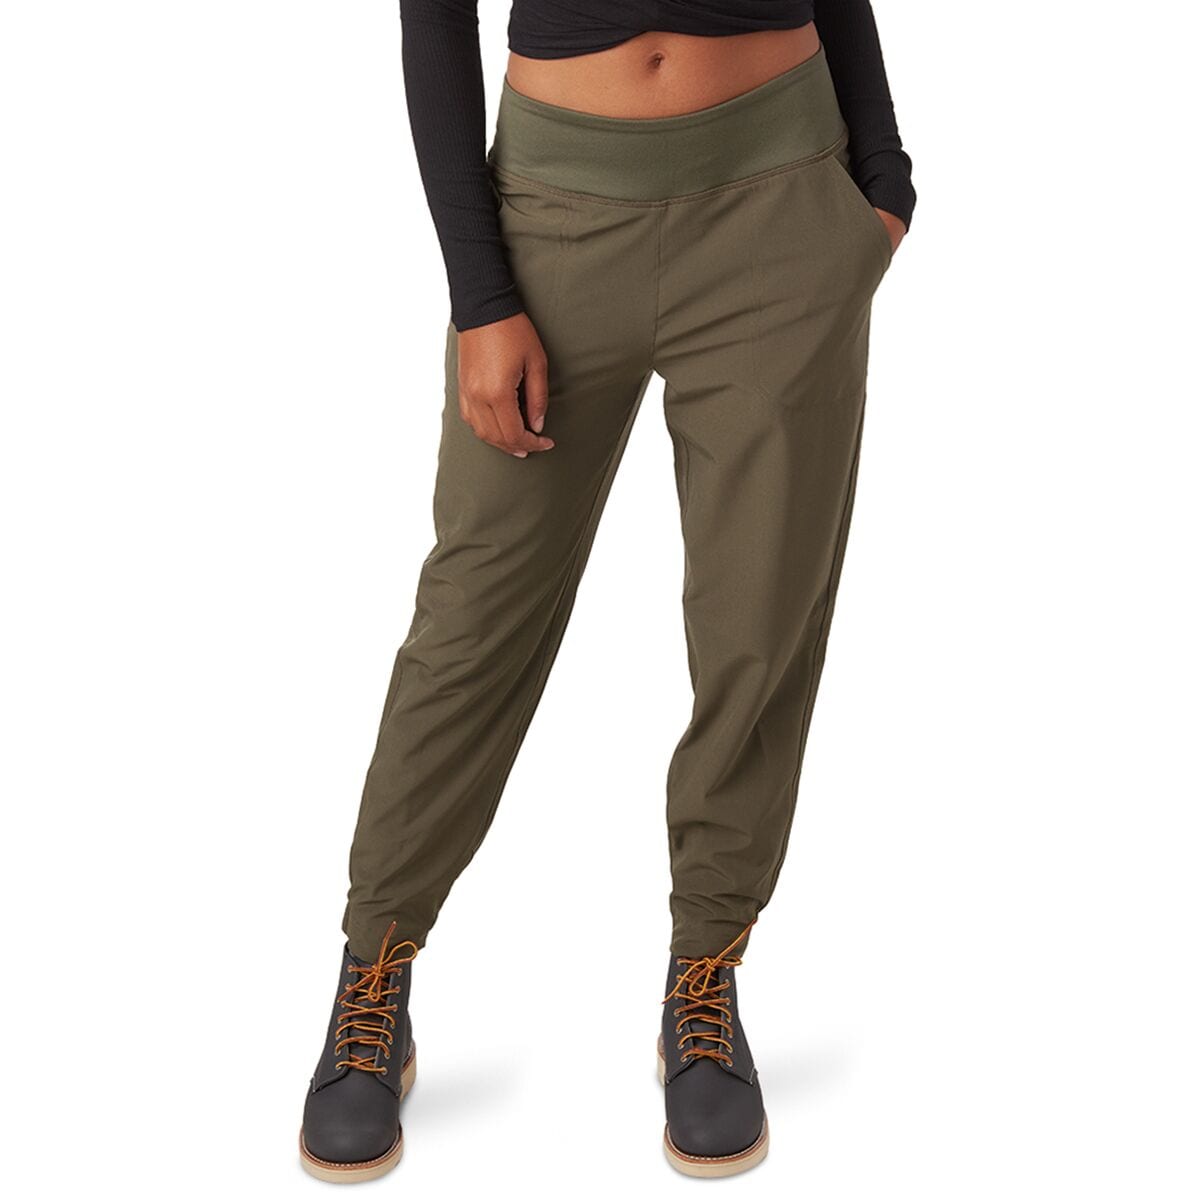 Patagonia Lined Happy Hike Studio Pant - Women's - Clothing